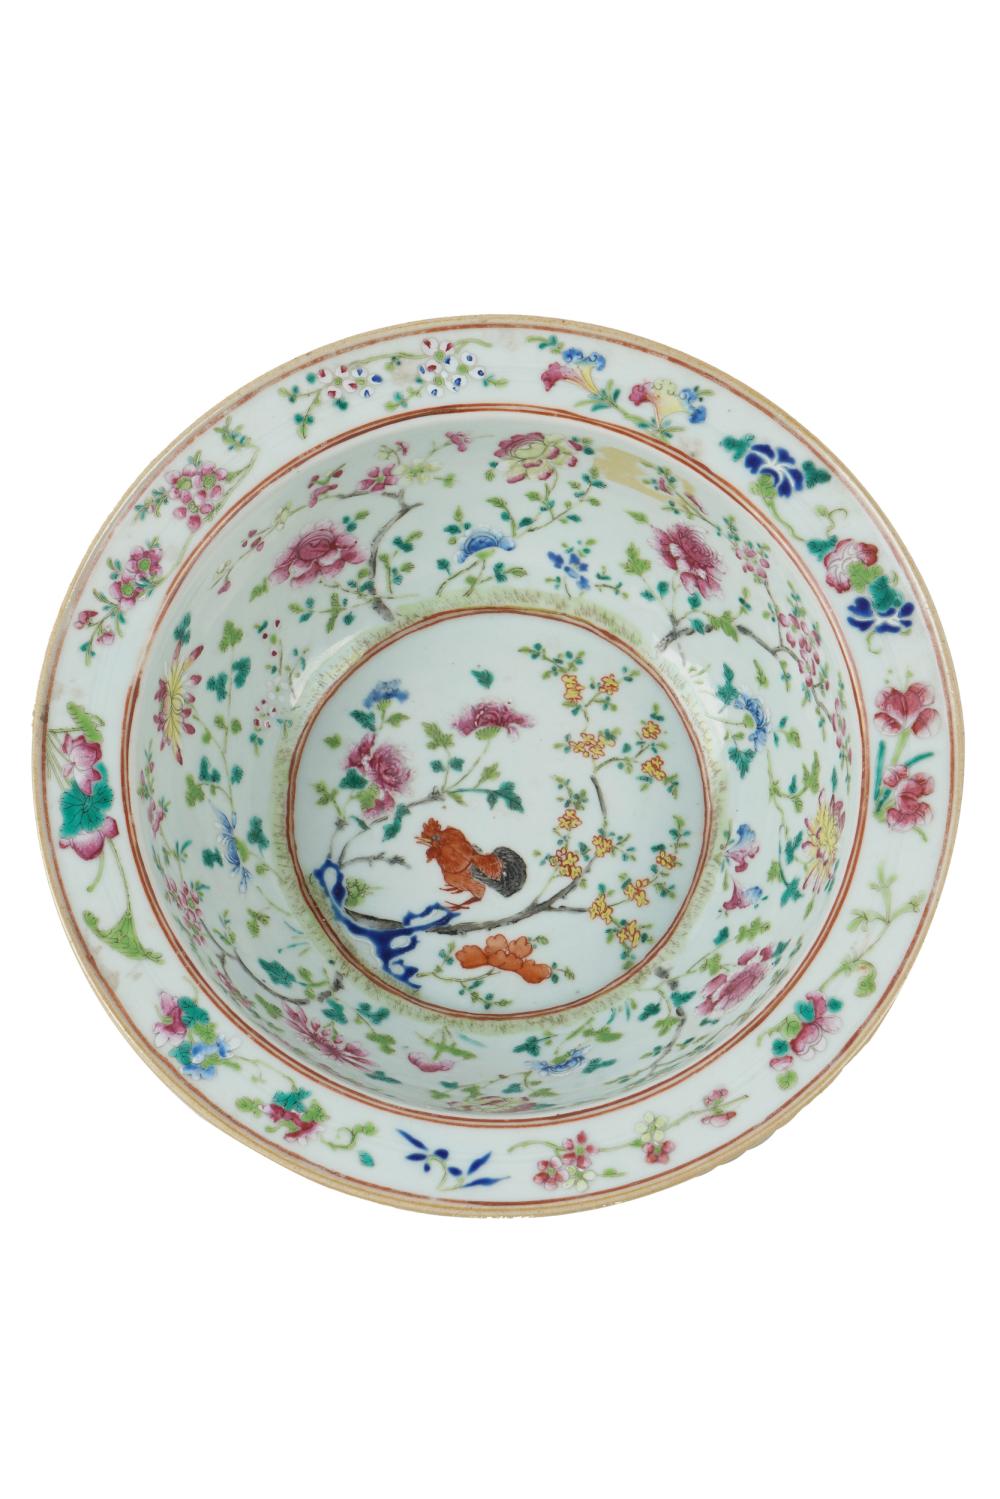 CHINESE PORCELAIN ROOSTER BOWL11 332946